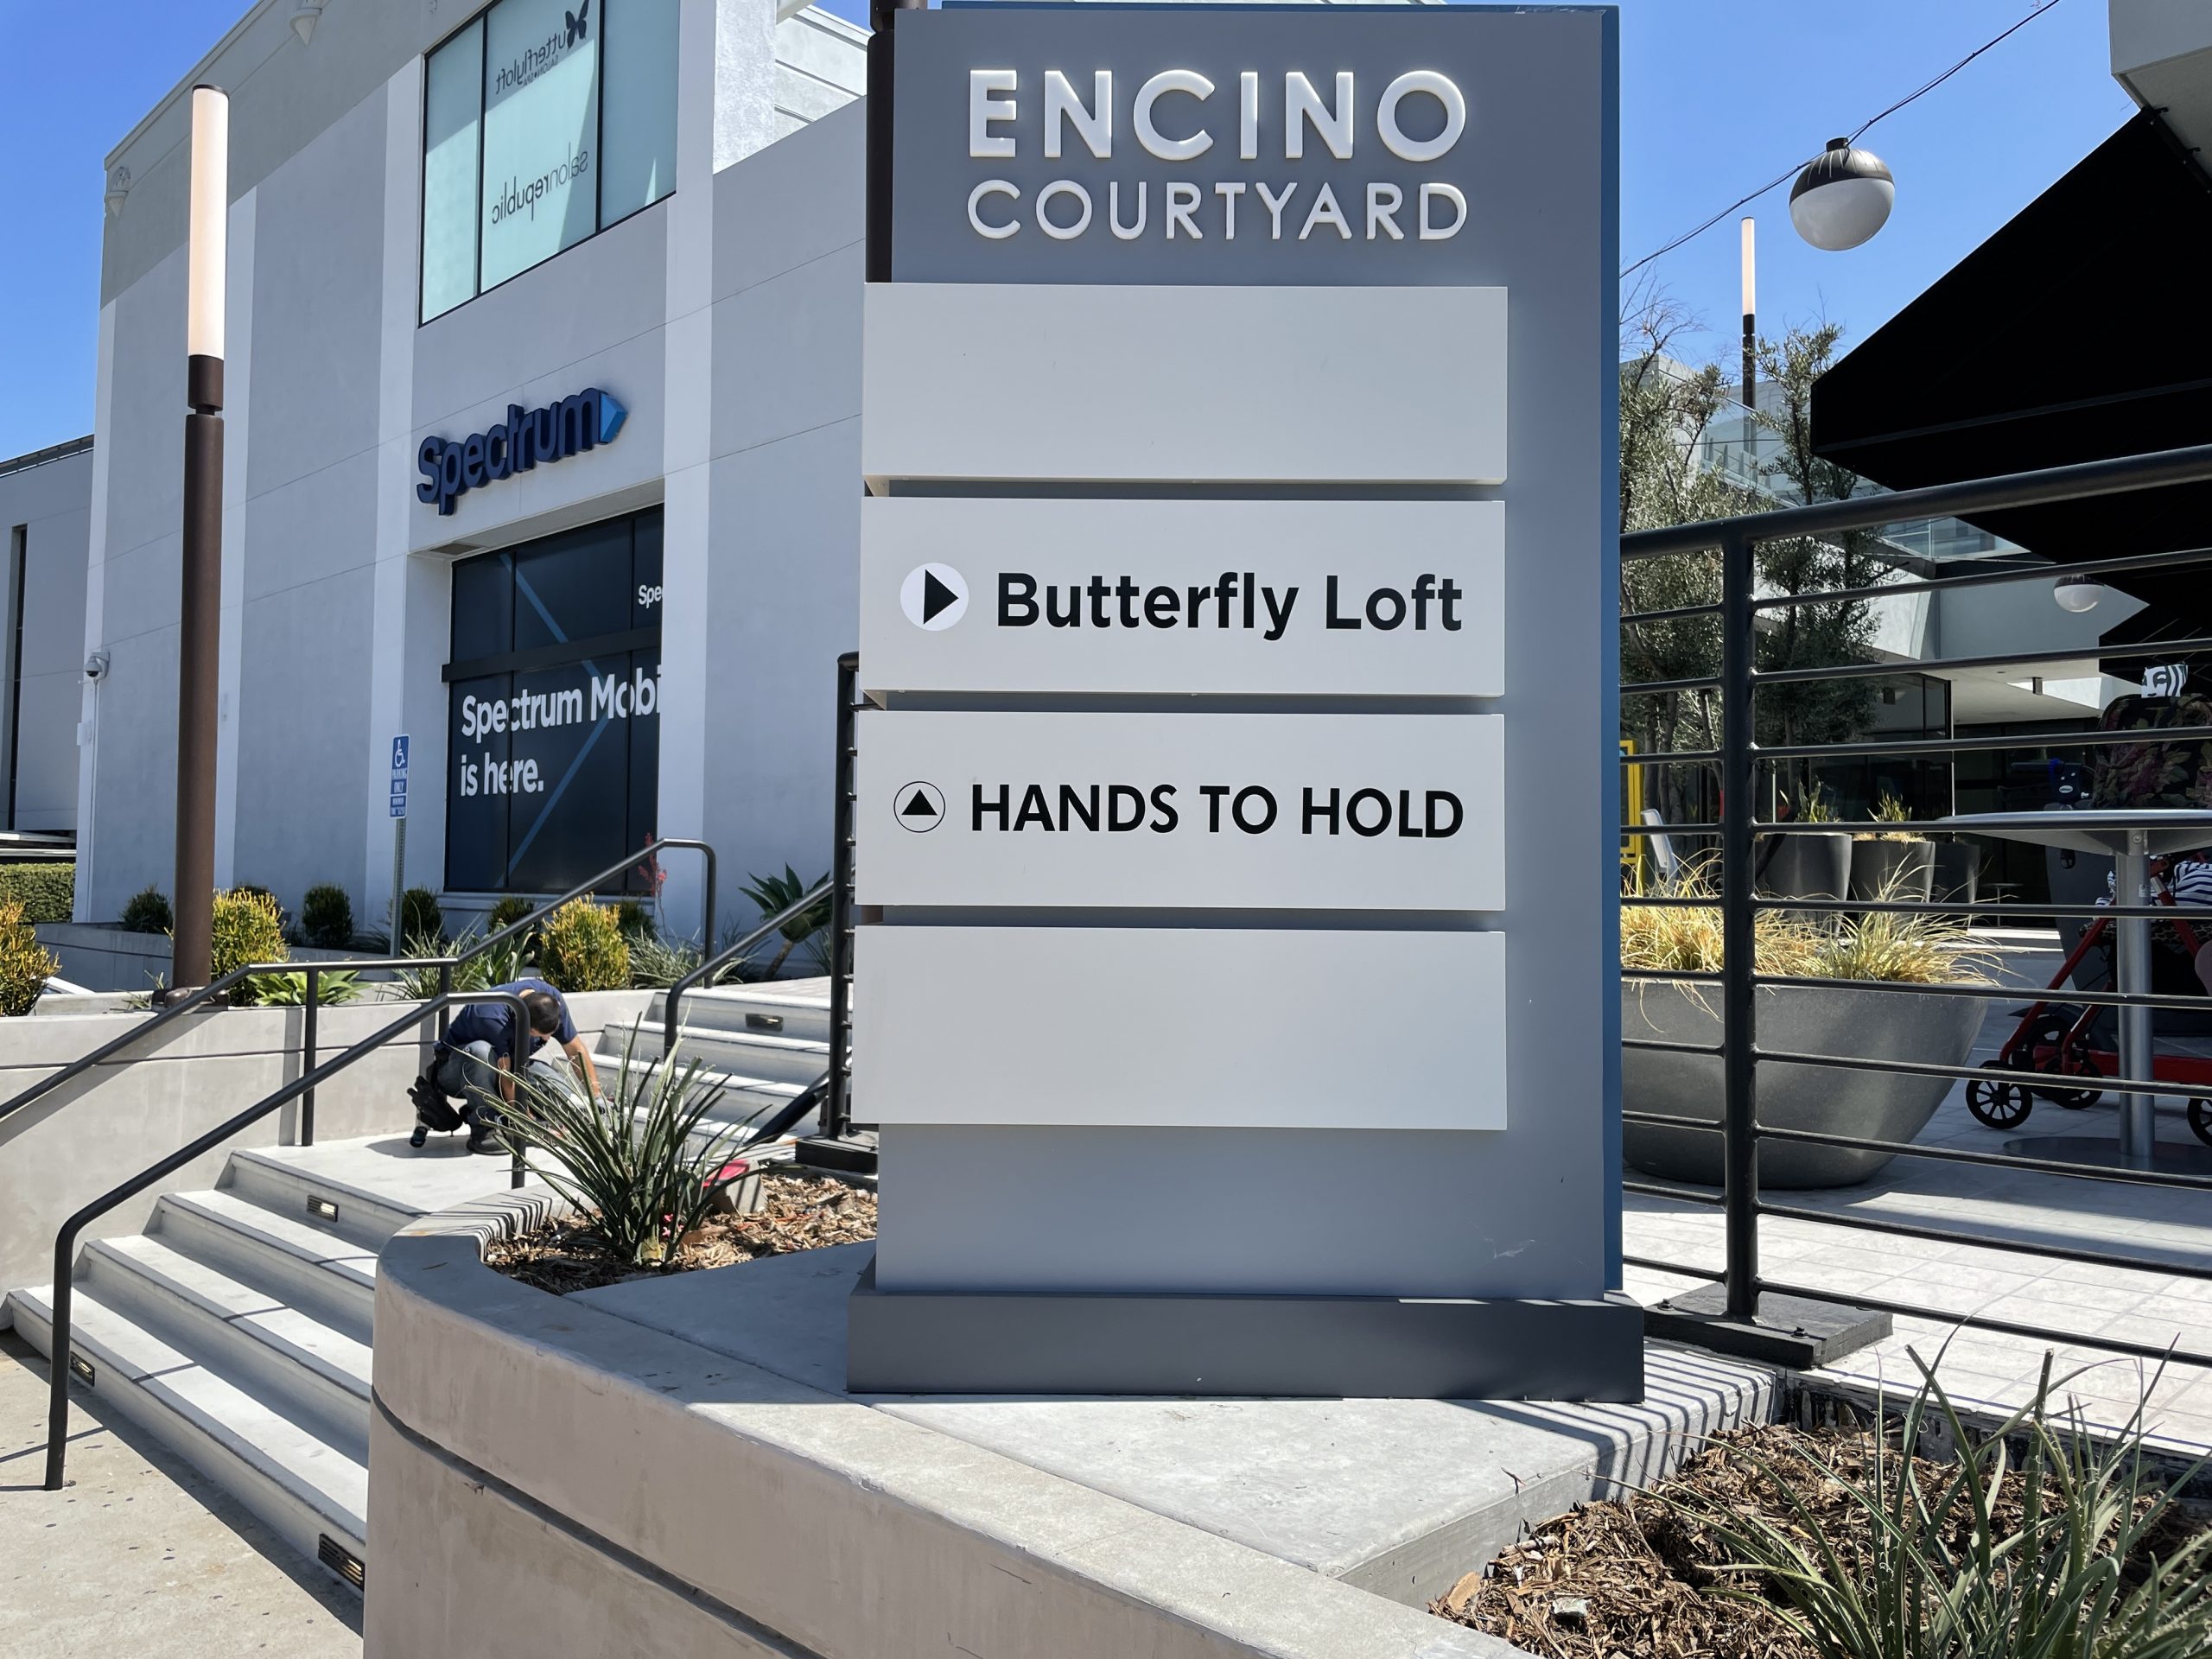 You are currently viewing Outdoor Wayfinding Signs for Hands to Hold in Encino Courtyard